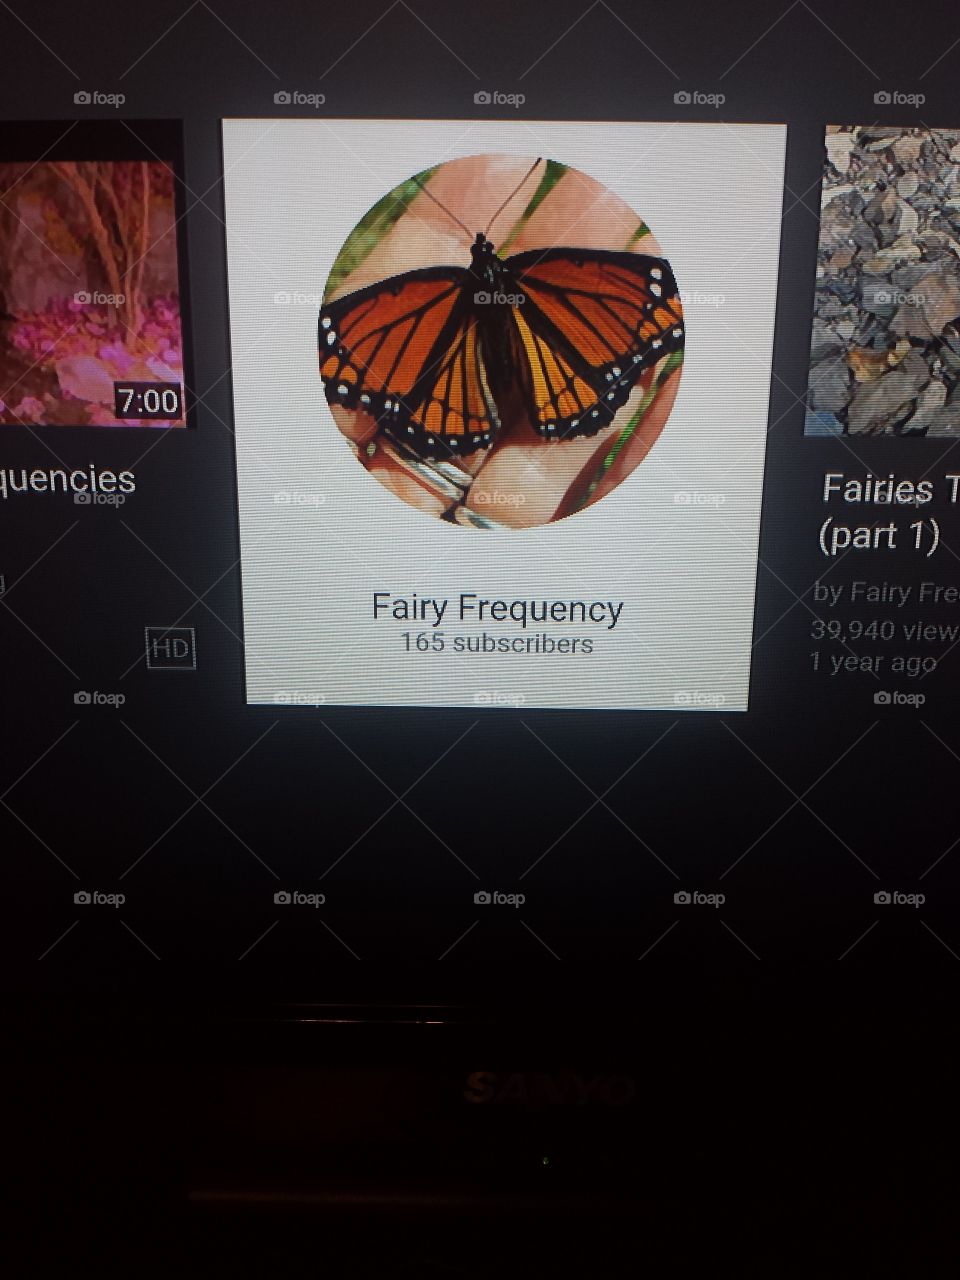 Fairy Frequency Youtube Channel